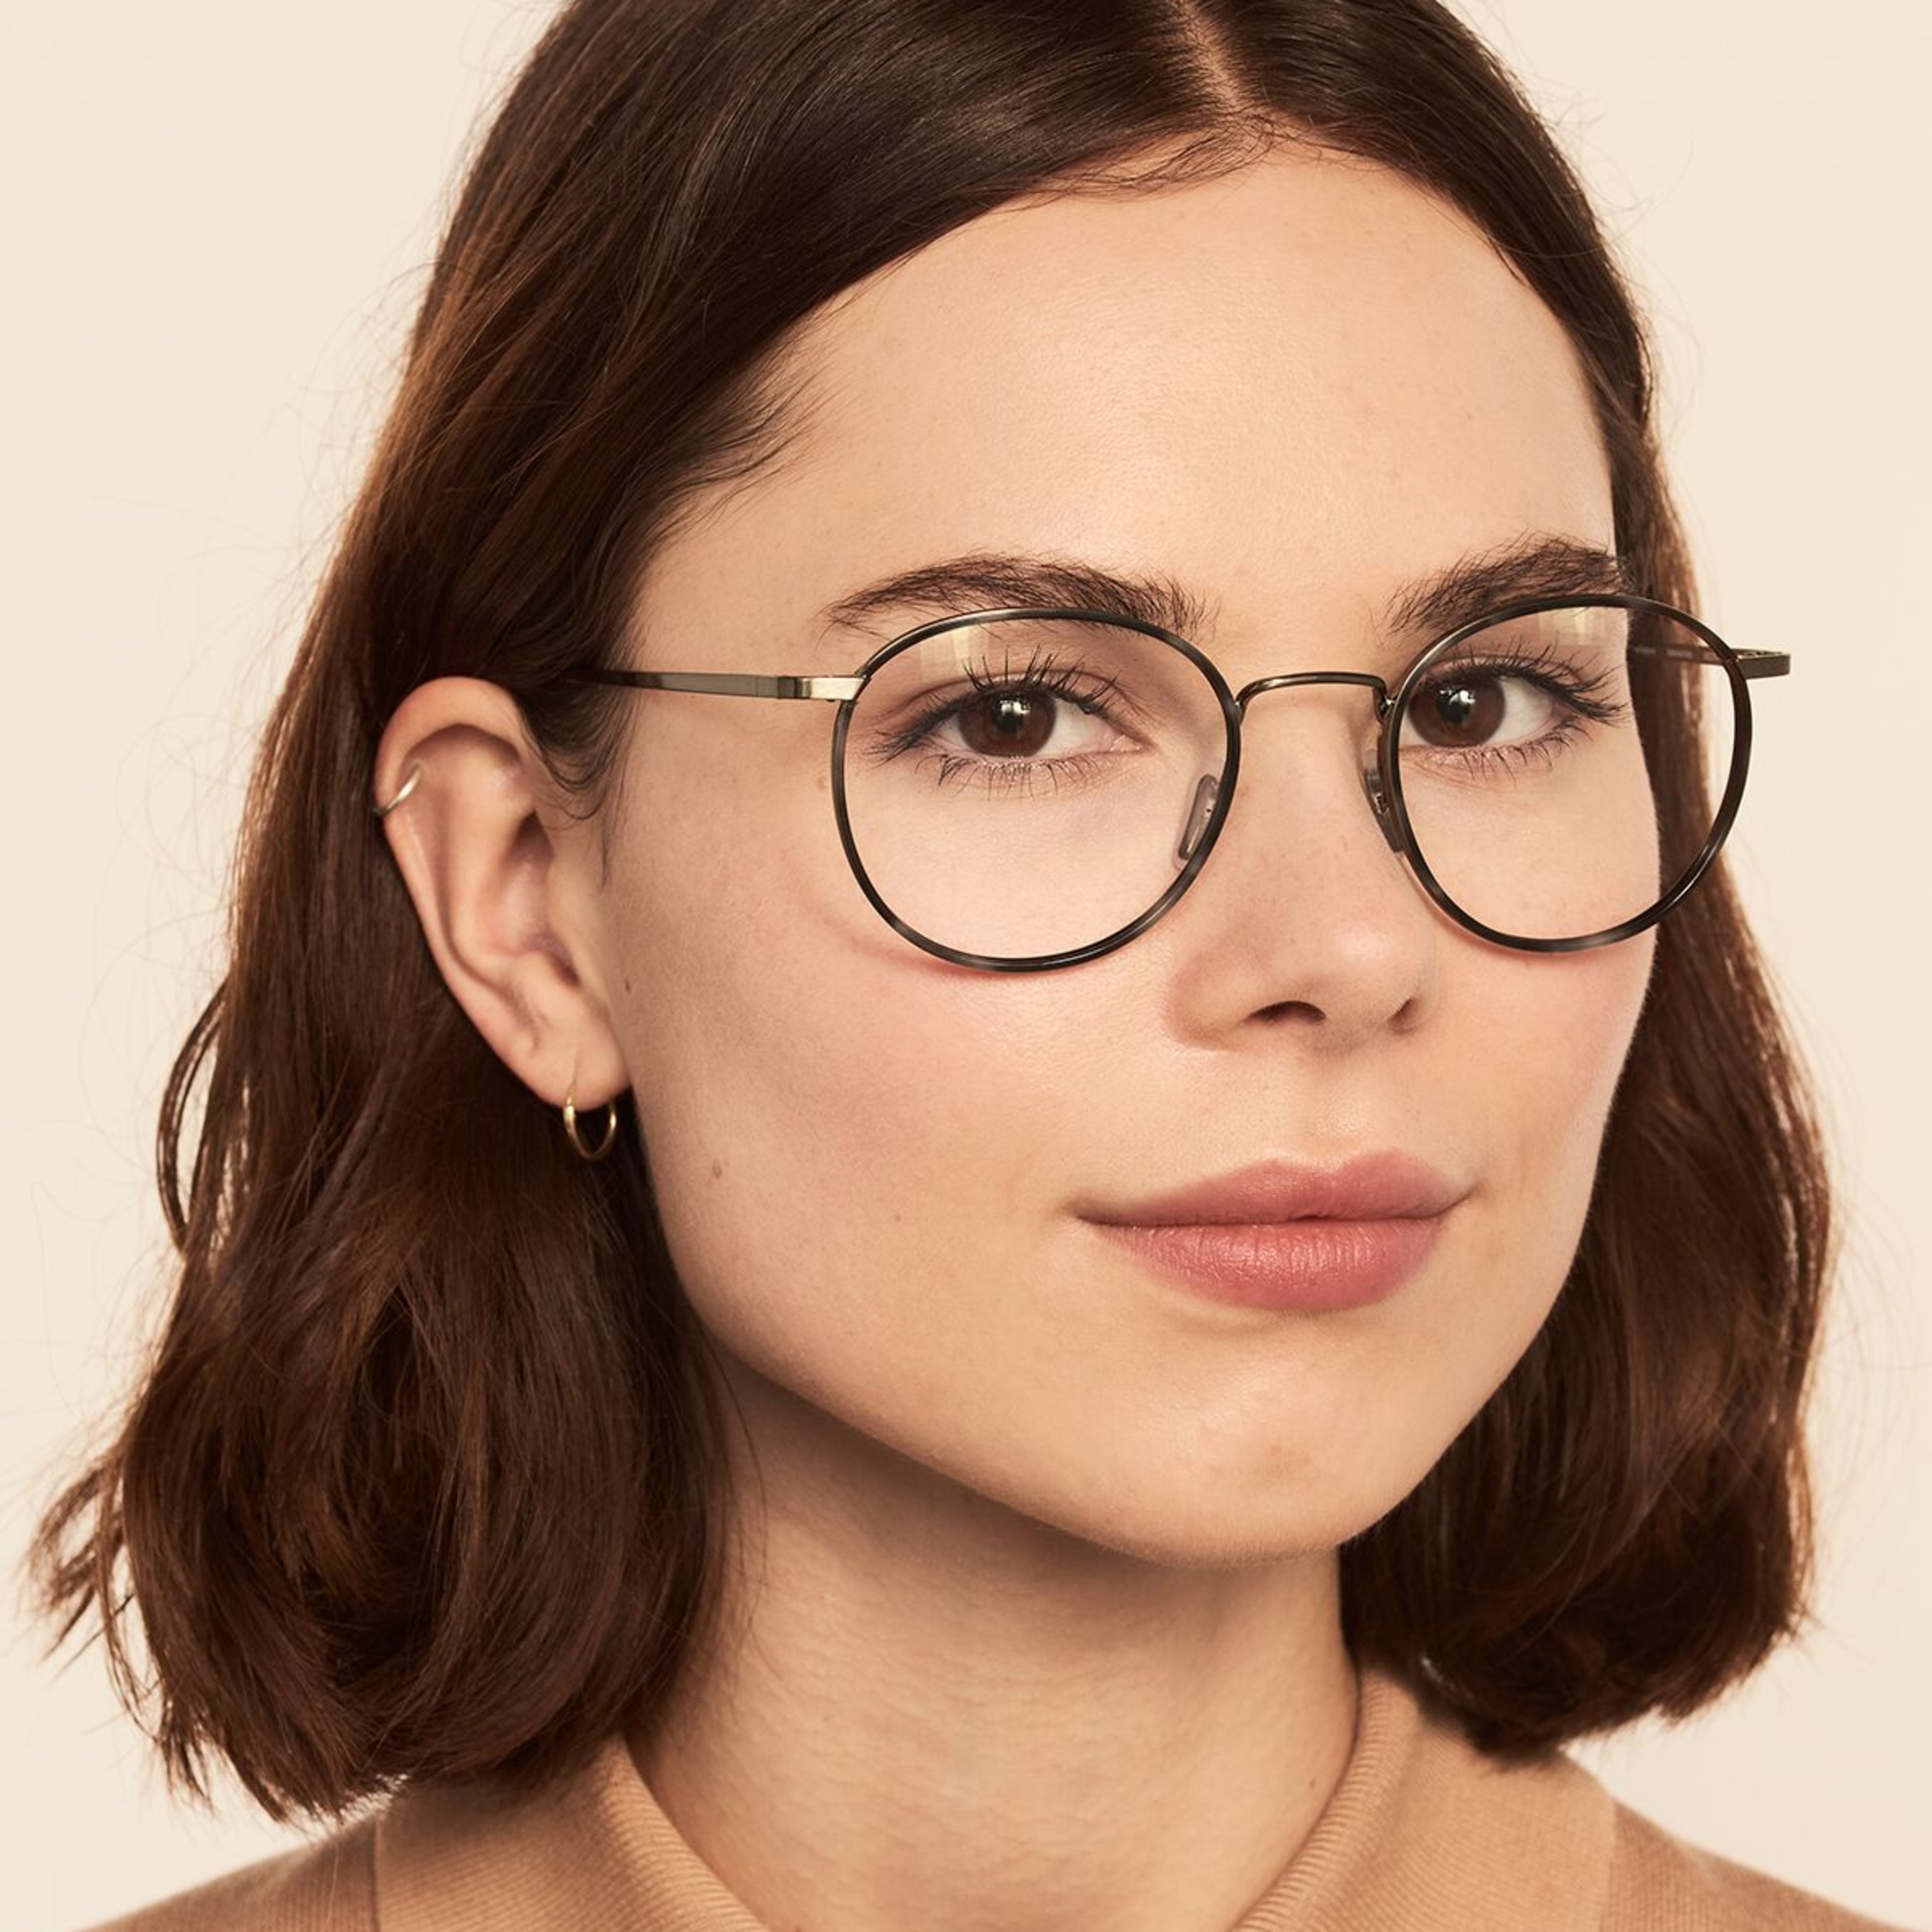 Ace & Tate Glasses | Round Metal in Green, Grey